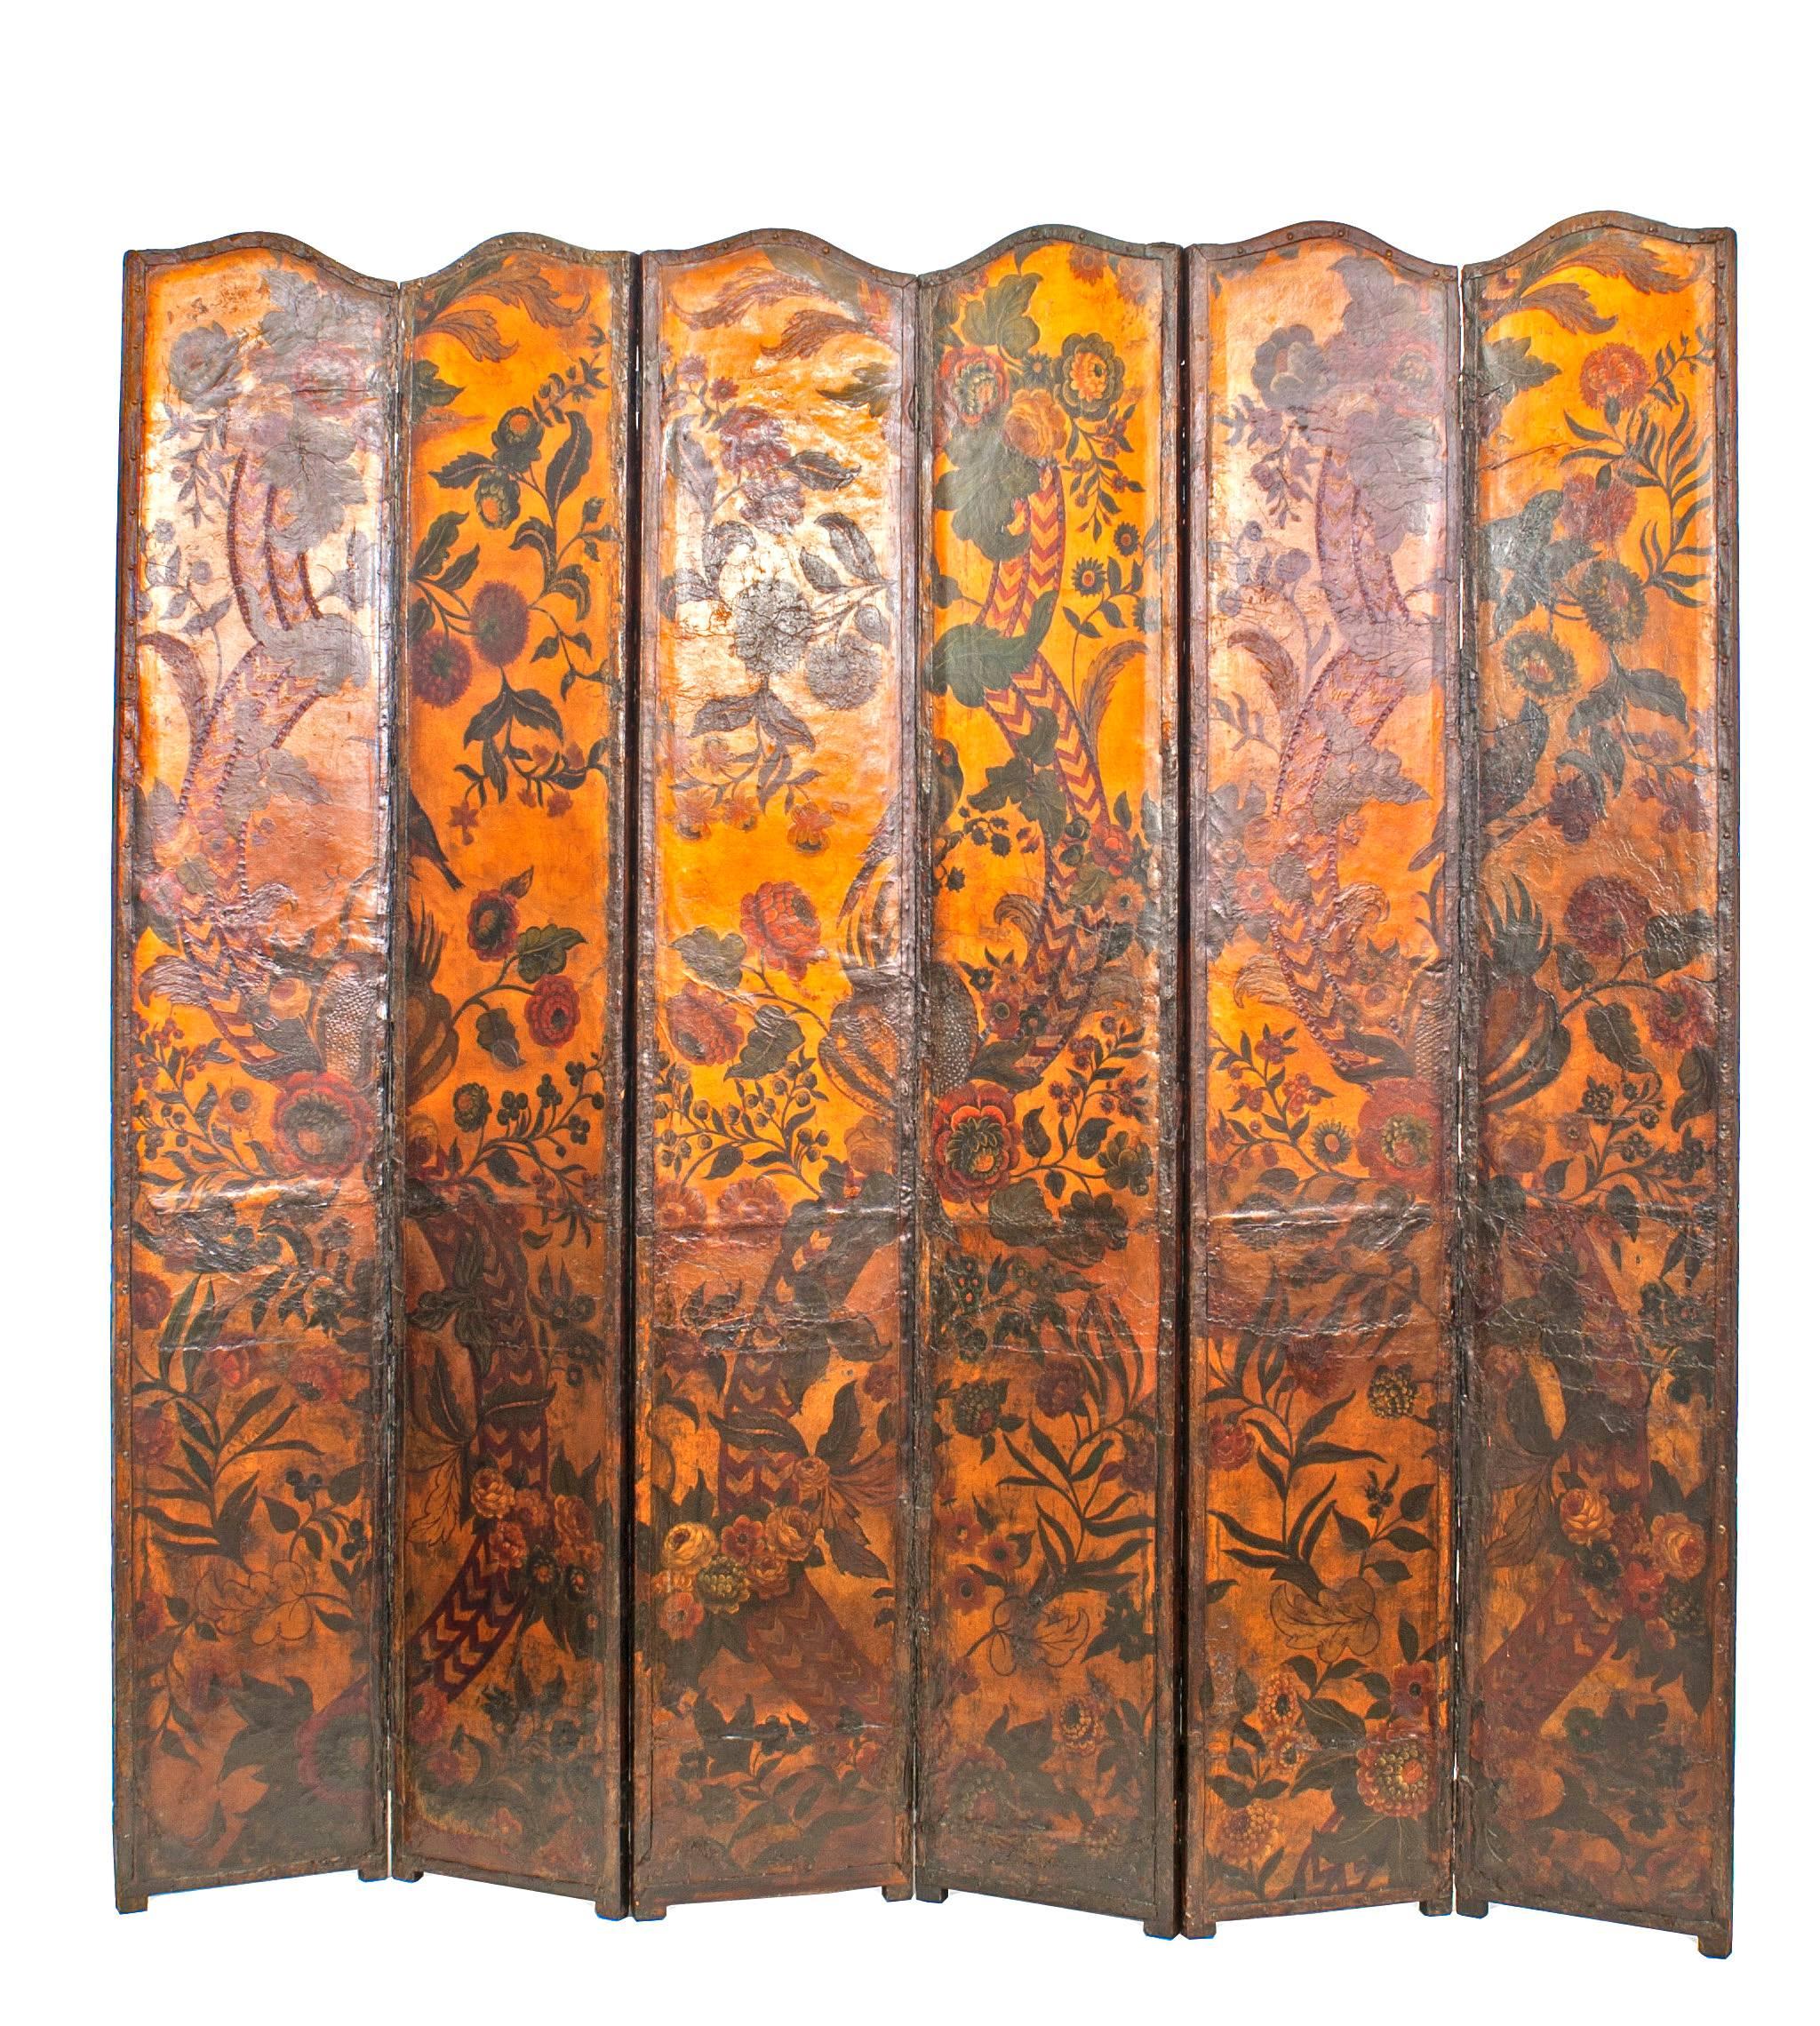 French Provincial Renaissance style (possibly 17th Century) leather mounted 6 panel screen with a gold background and decorated with painted parrots and foliage.
 